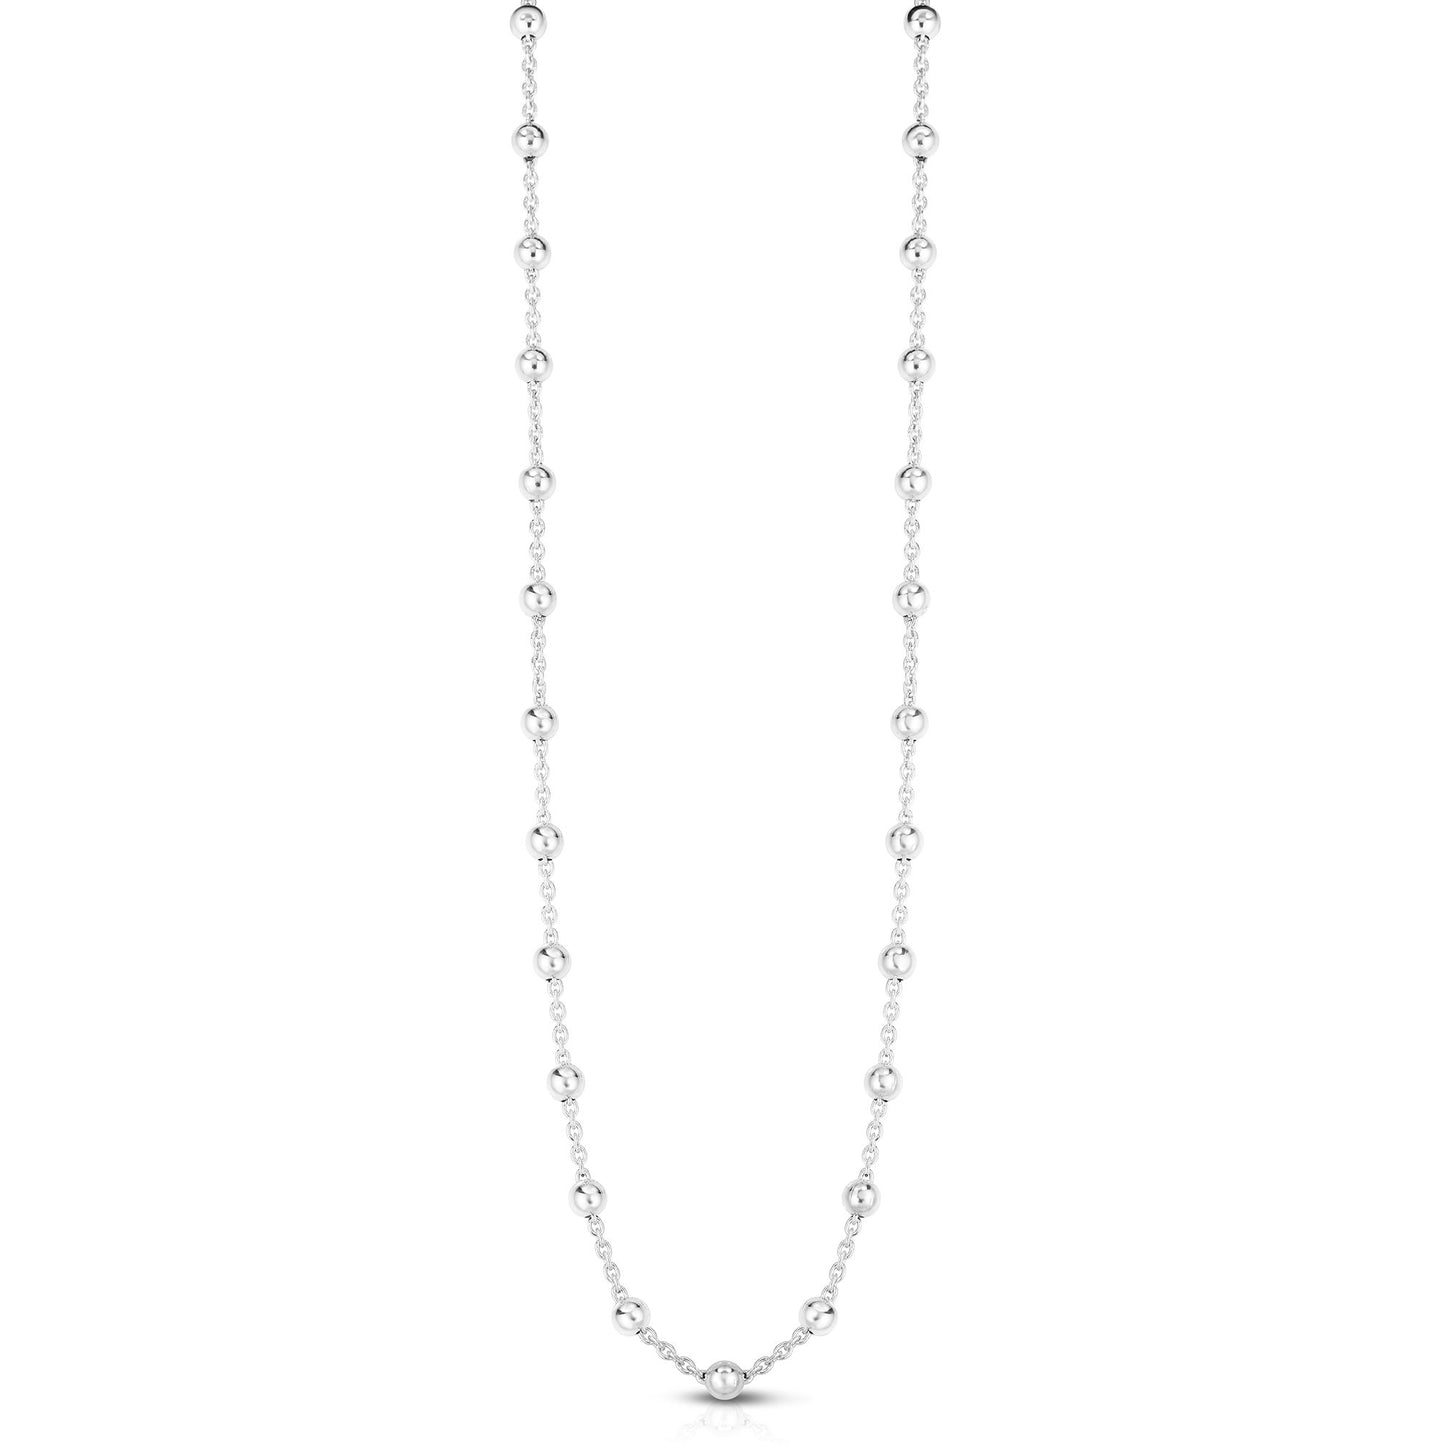 Silver Multi Bead Station Necklace